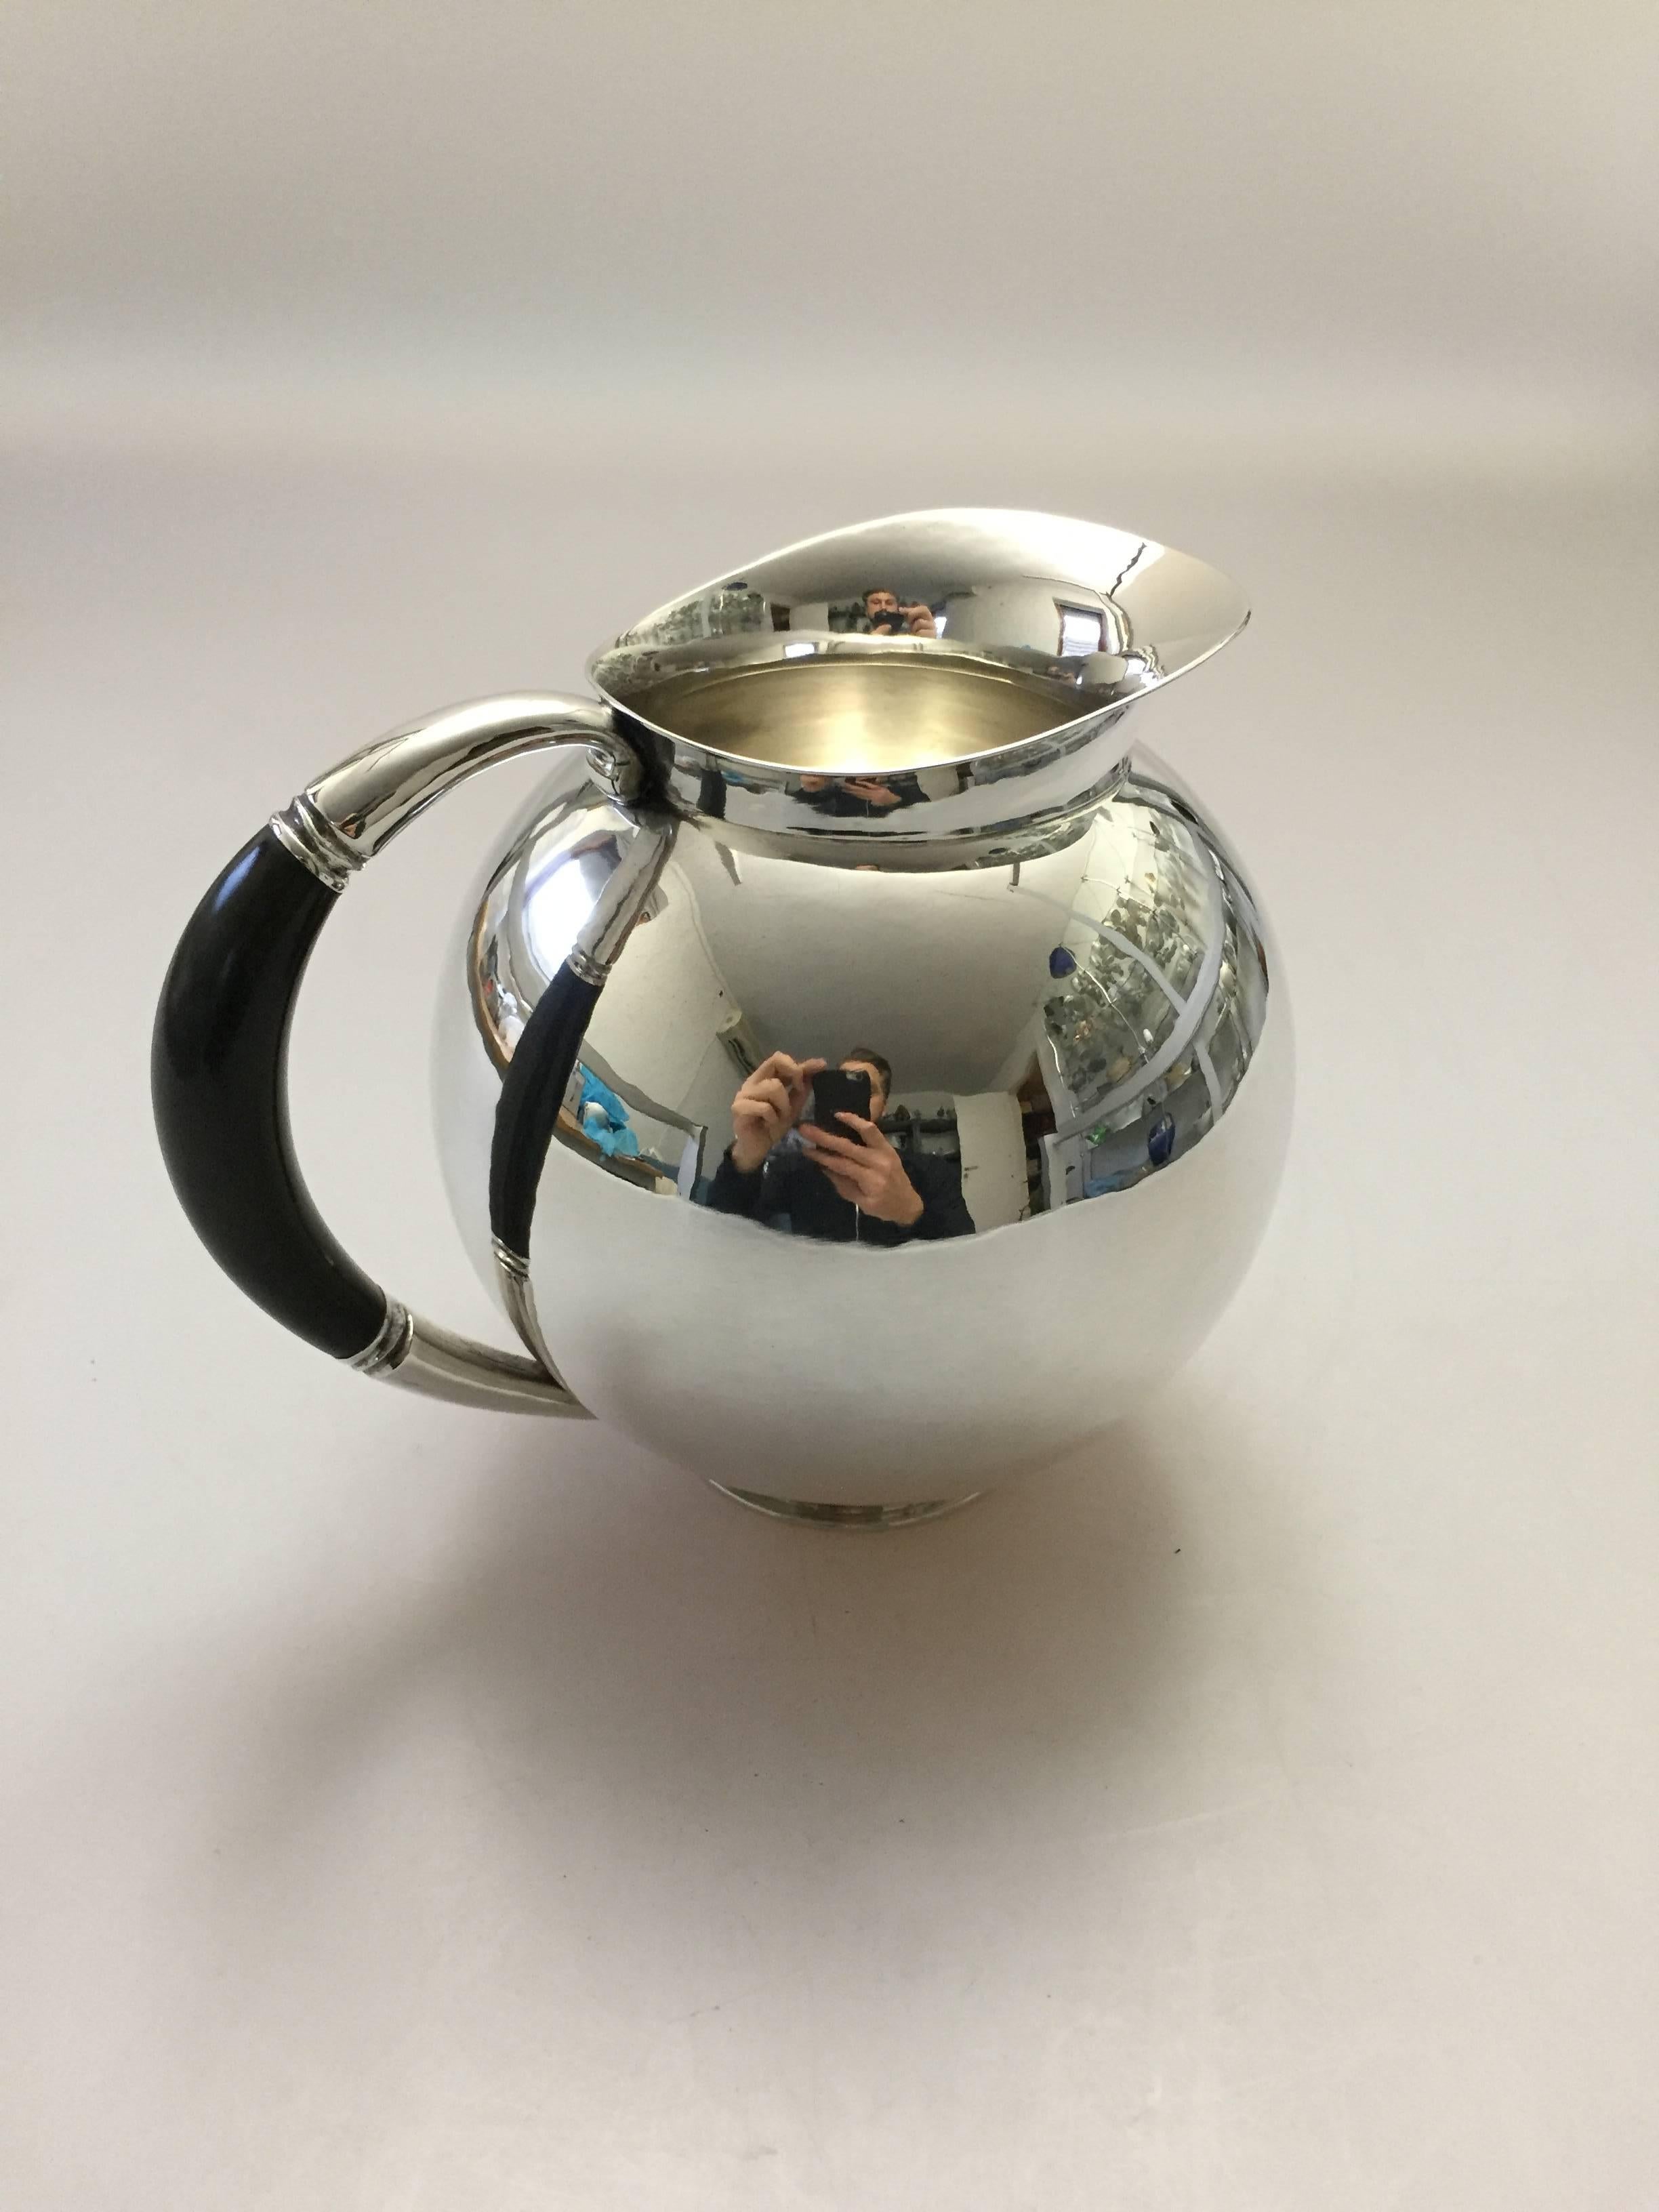 Georg Jensen sterling silver pitcher #533. With marks from 1925-1933.

Measures: 15 cm / 5 9/10